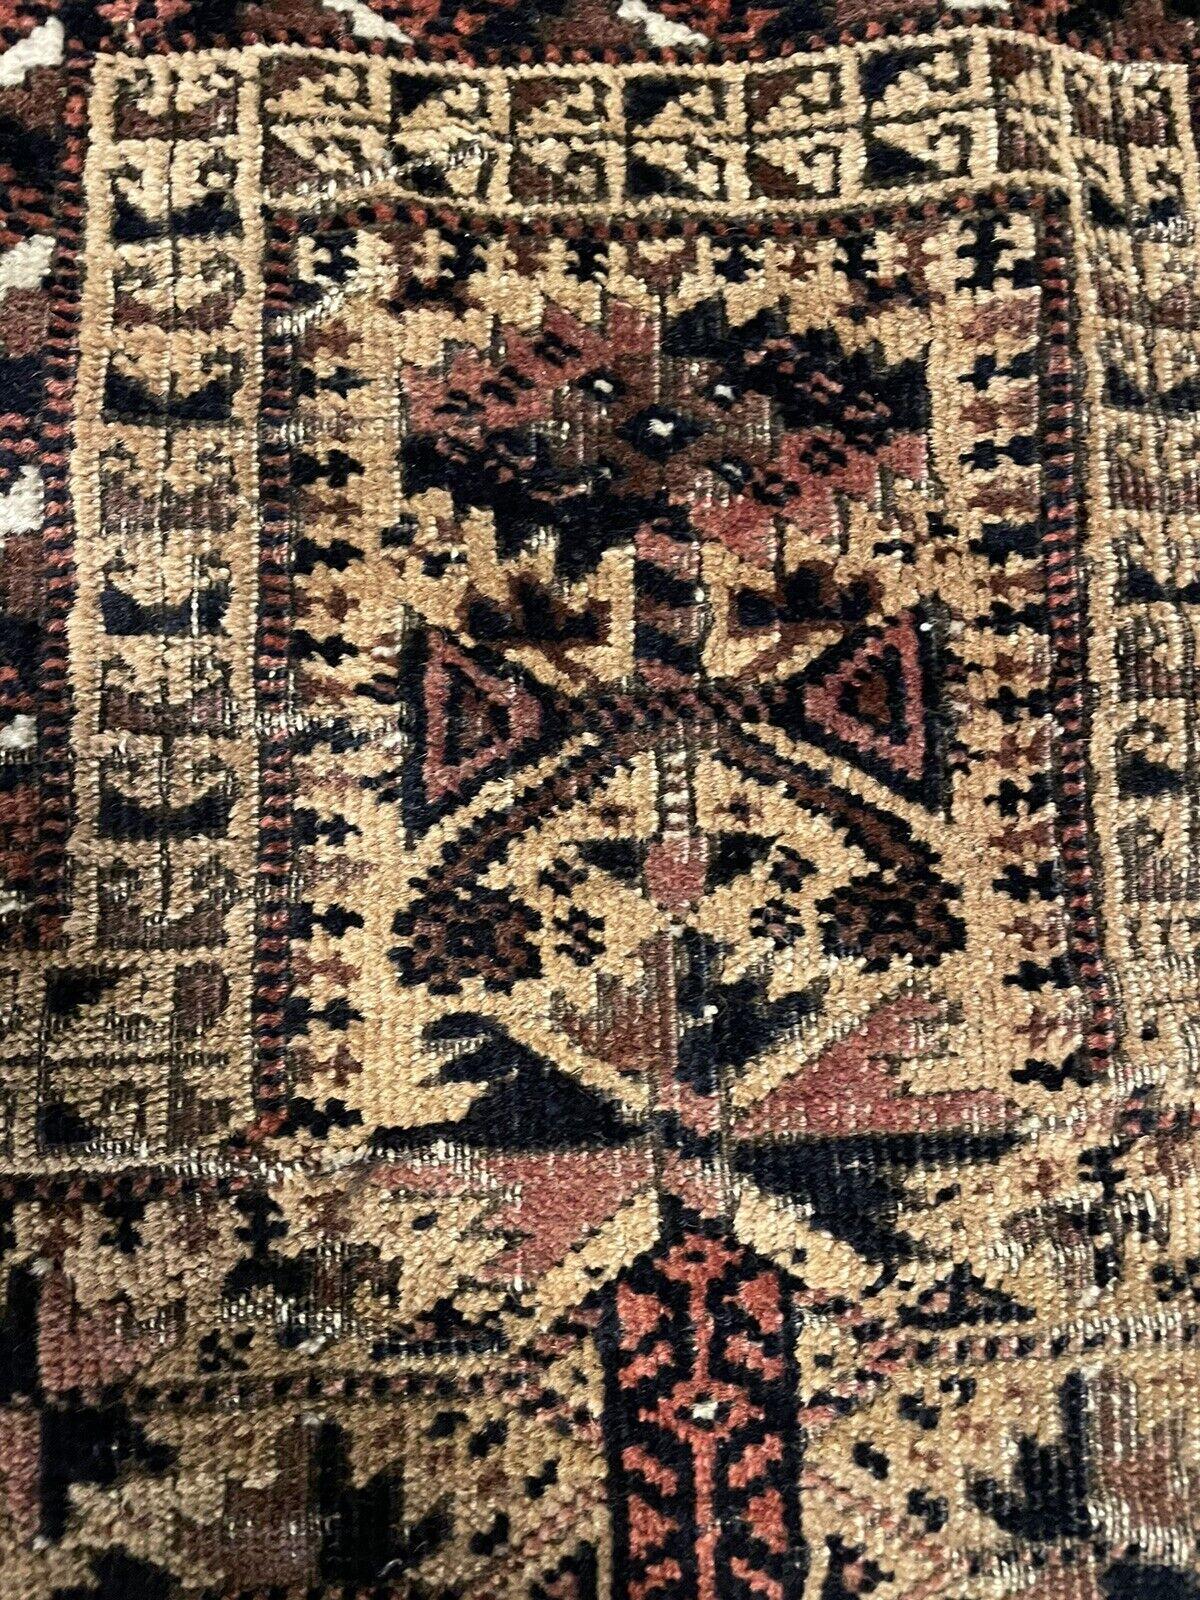 Late 19th Century Handmade Antique Afghan Baluch Collectible Rug 2.5' x 4.6', 1880s - 1N18 For Sale